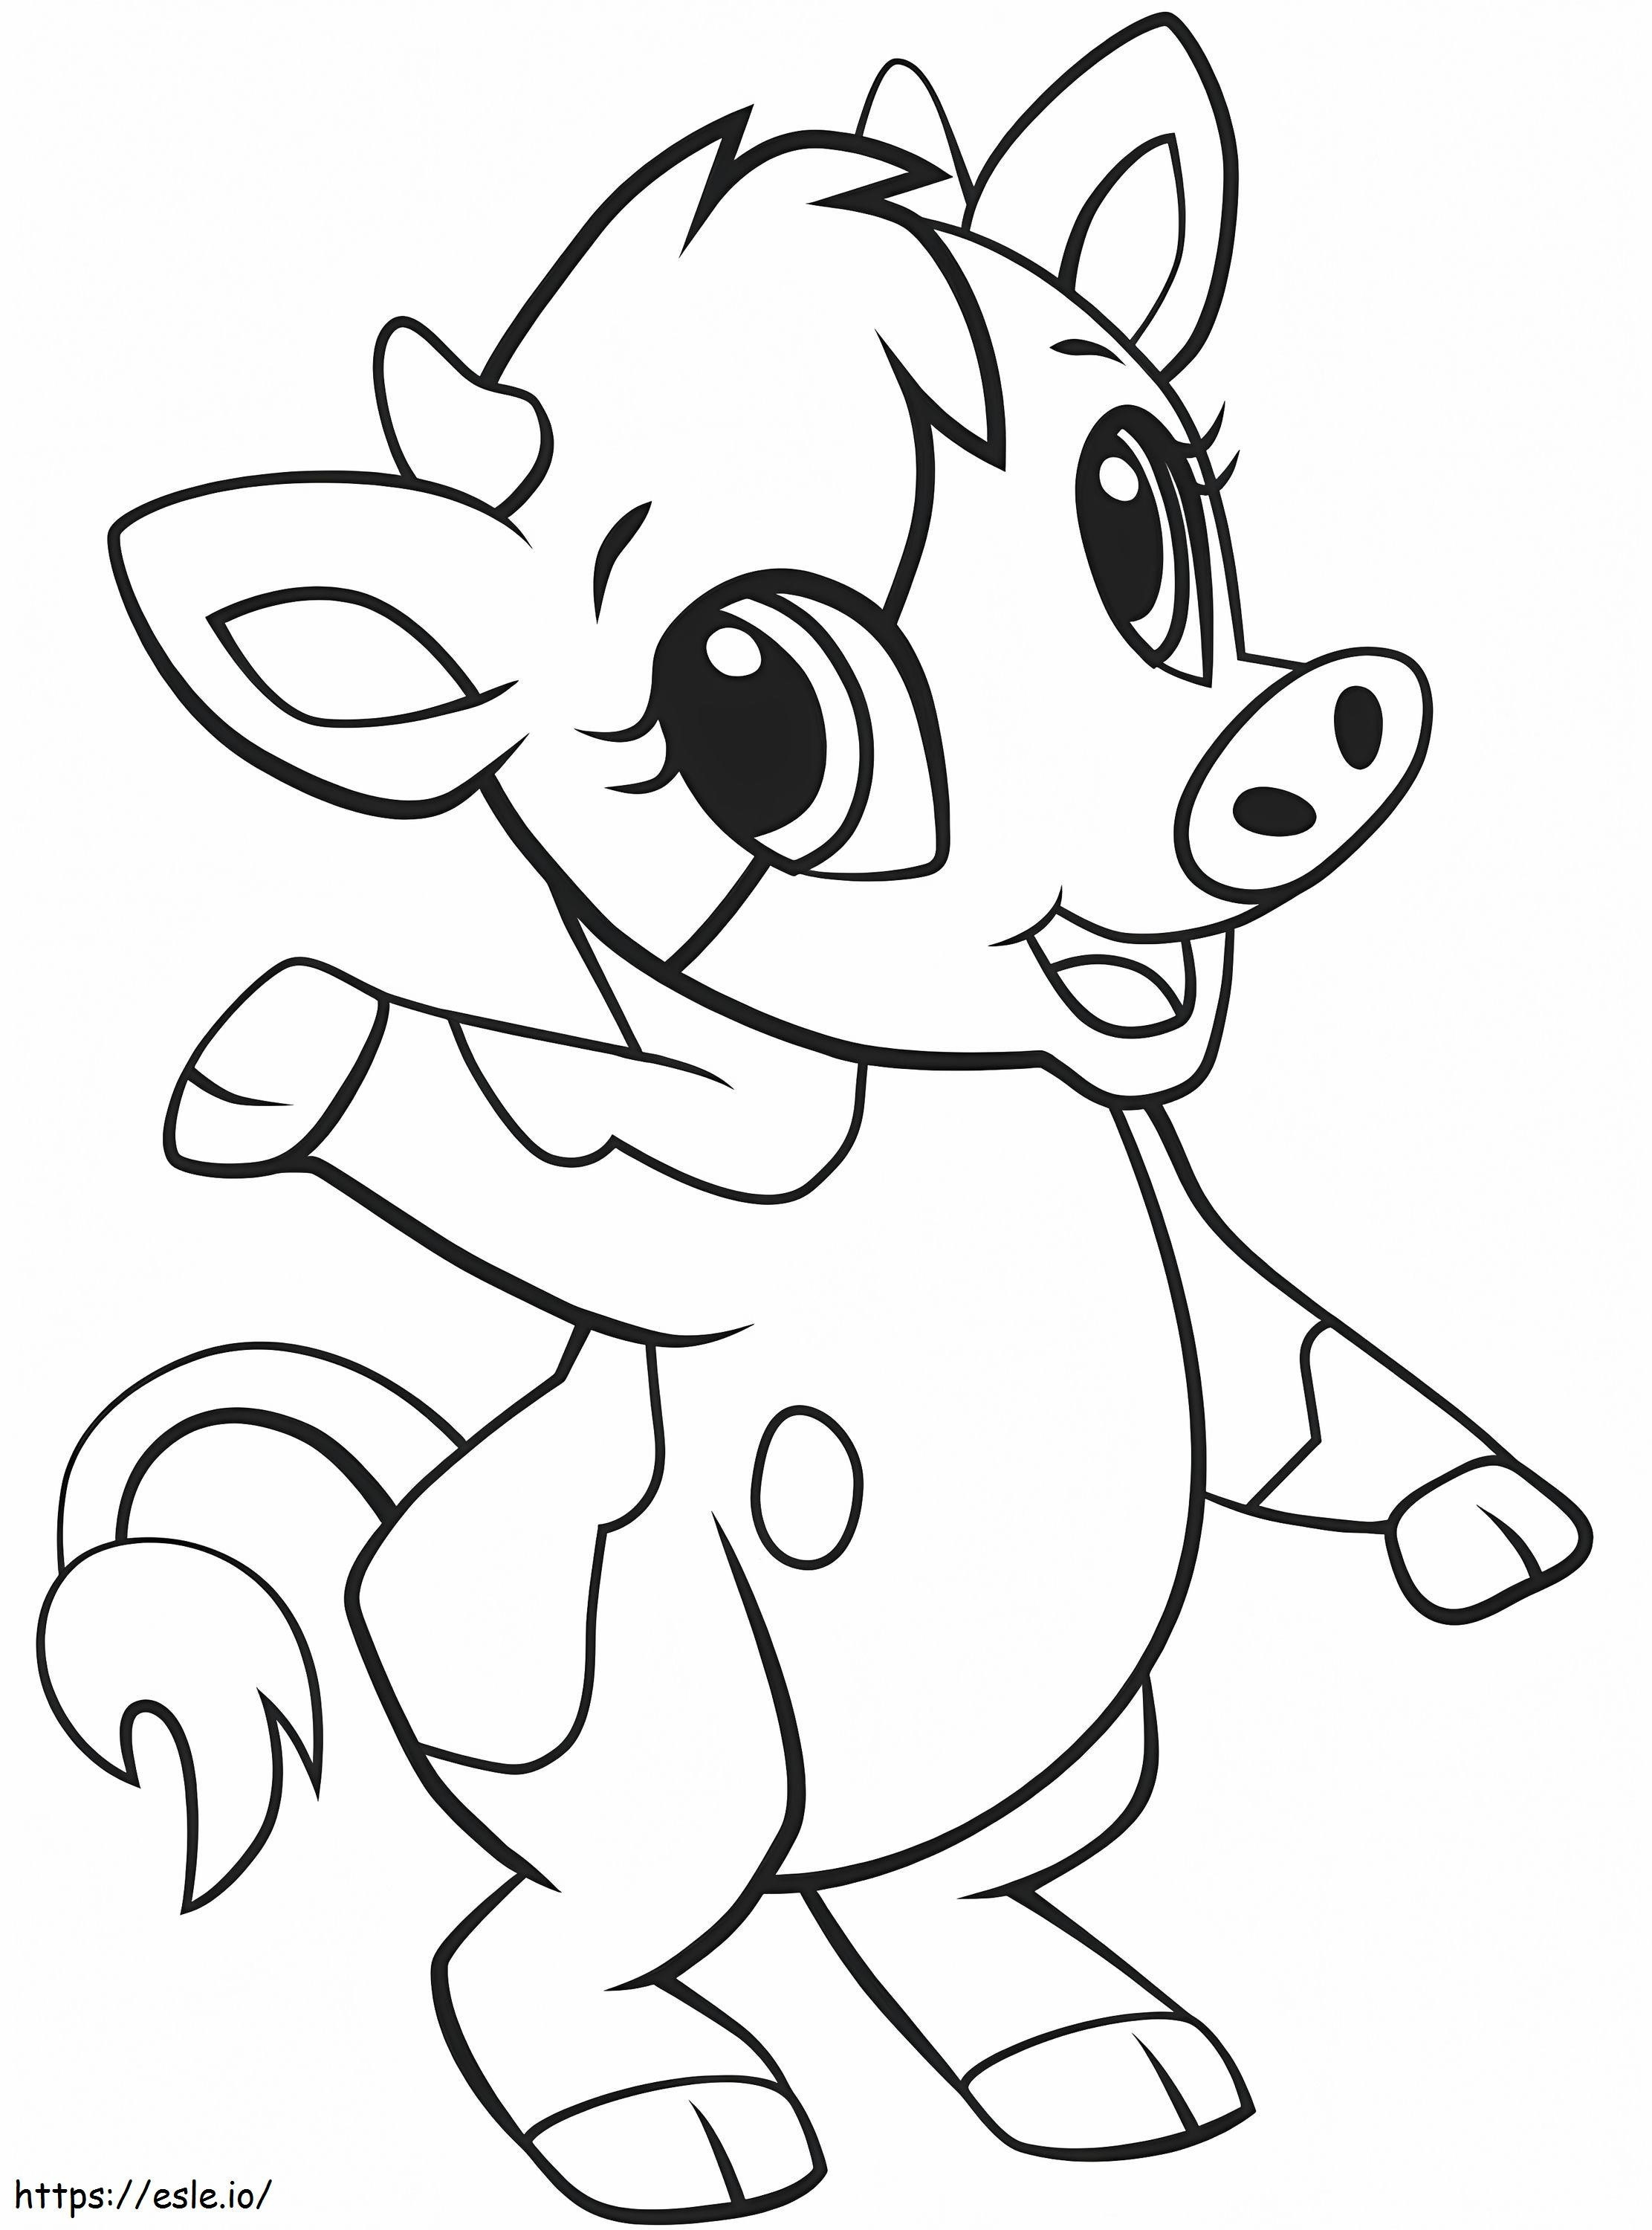 1559984831 Cow A4 coloring page